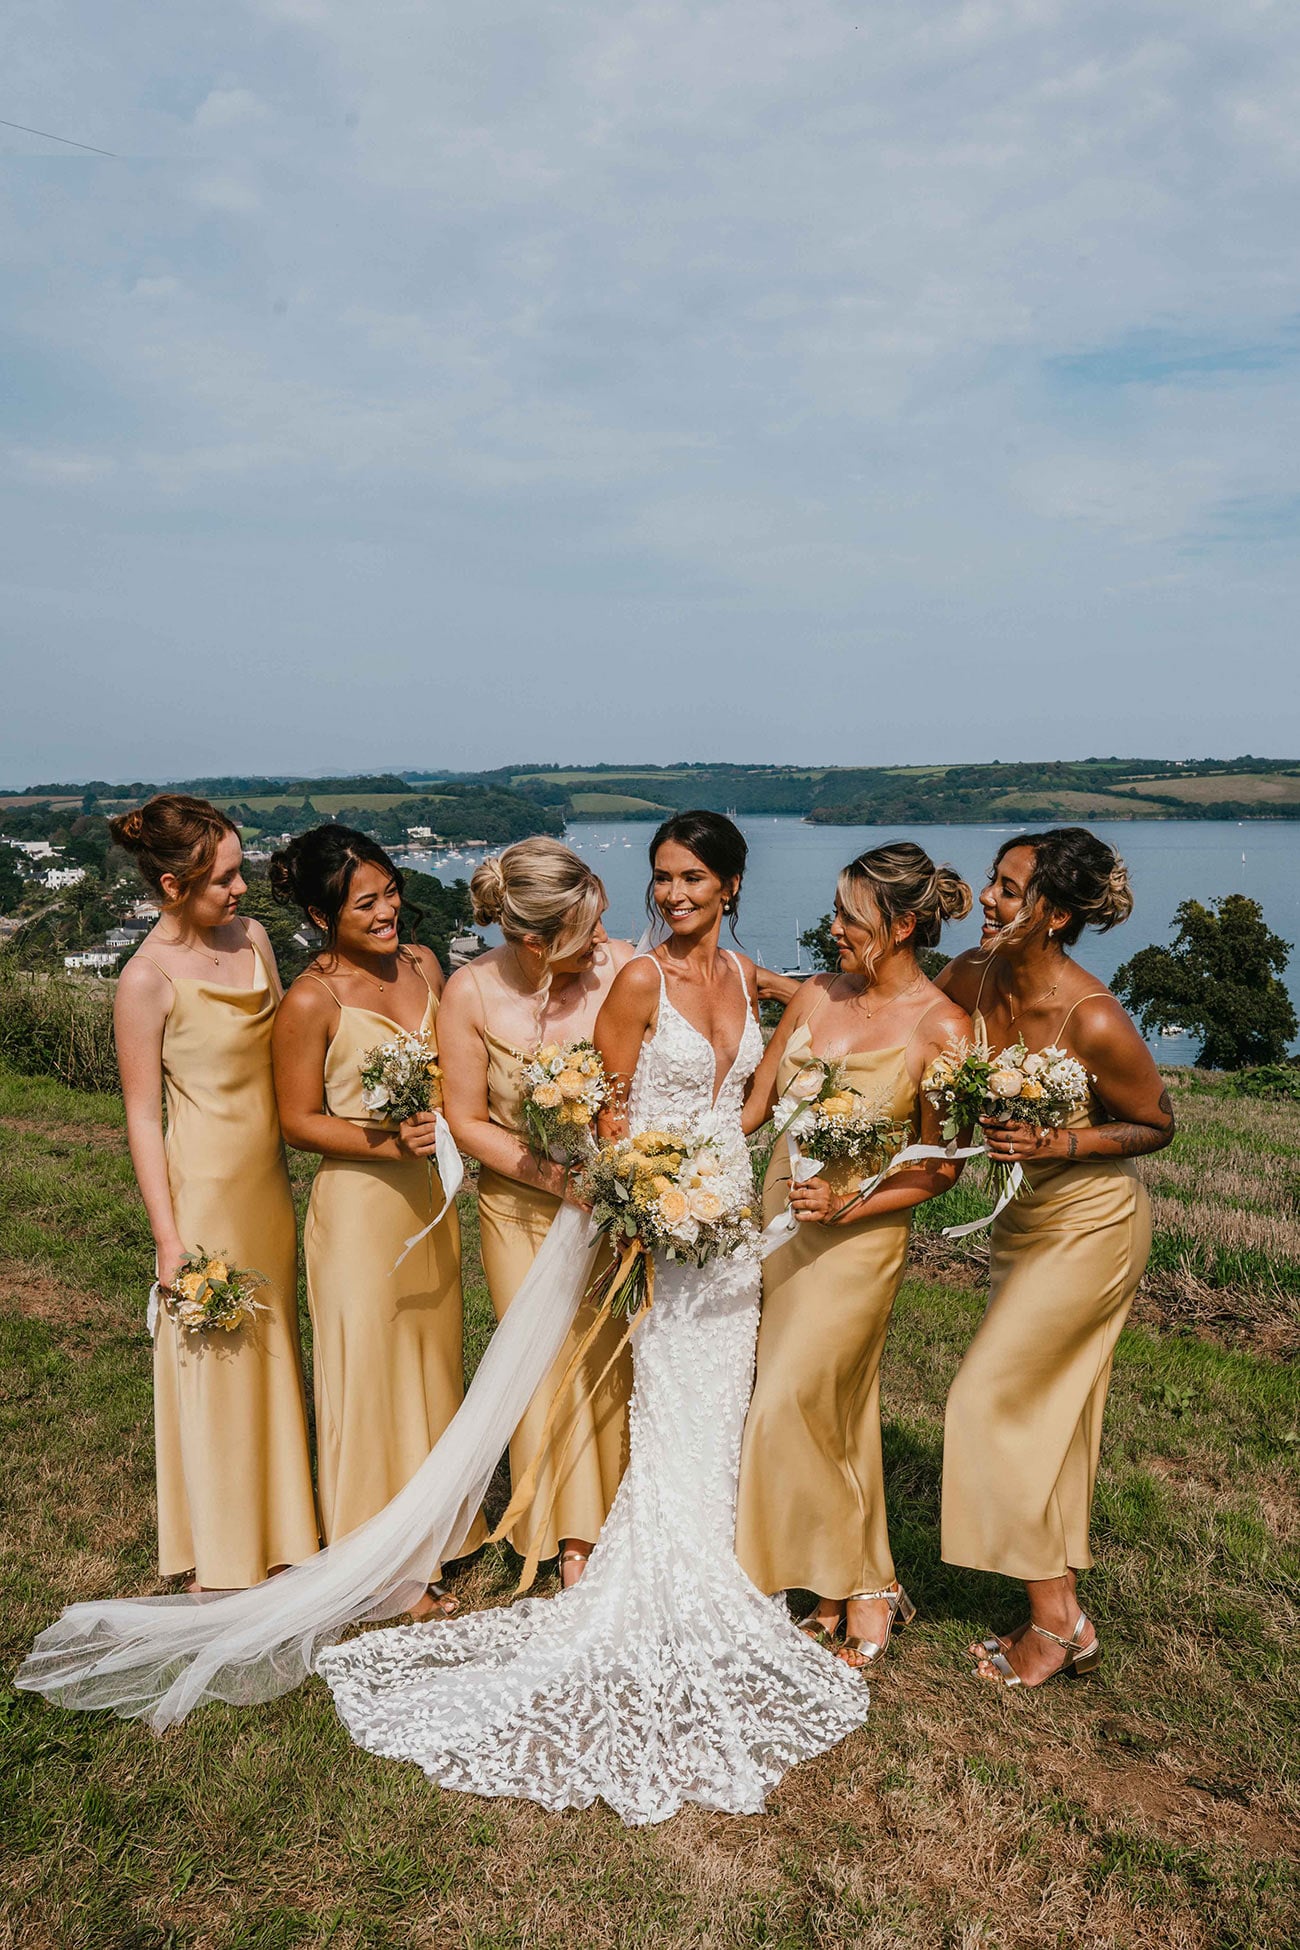 The bride smiles with her four bridesmaids who are dressed in gold